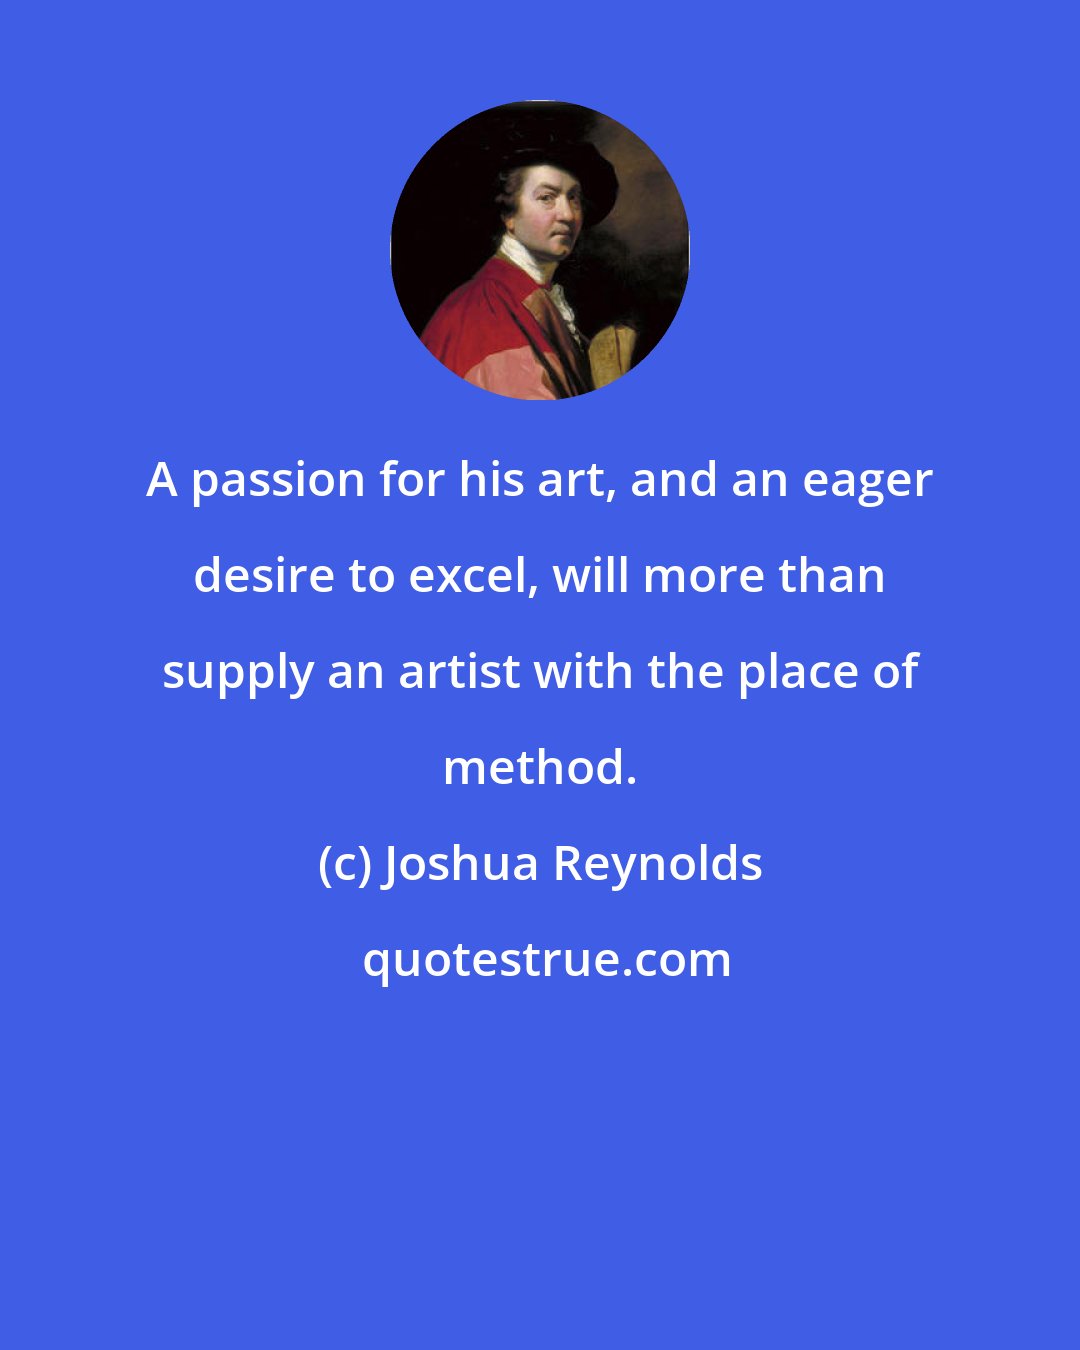 Joshua Reynolds: A passion for his art, and an eager desire to excel, will more than supply an artist with the place of method.